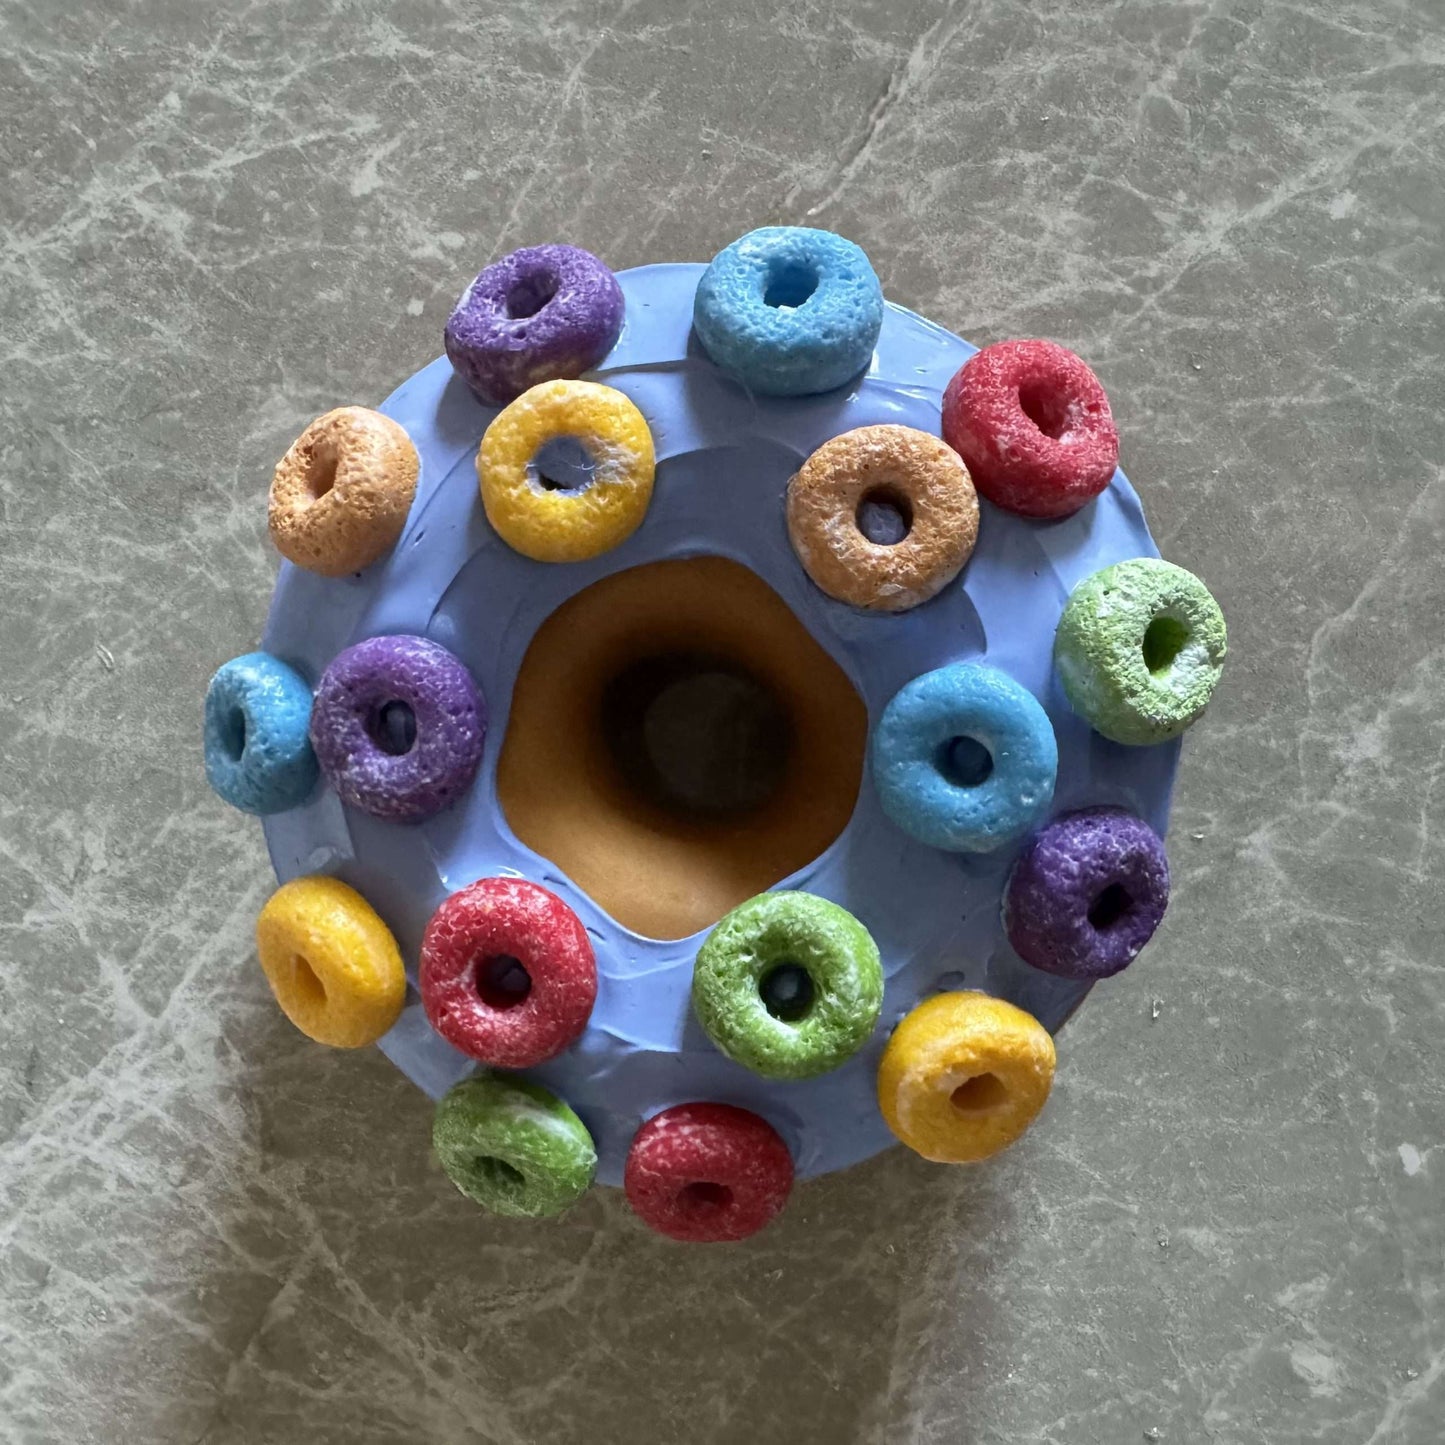 Donut with light blue icing and round colored cereals